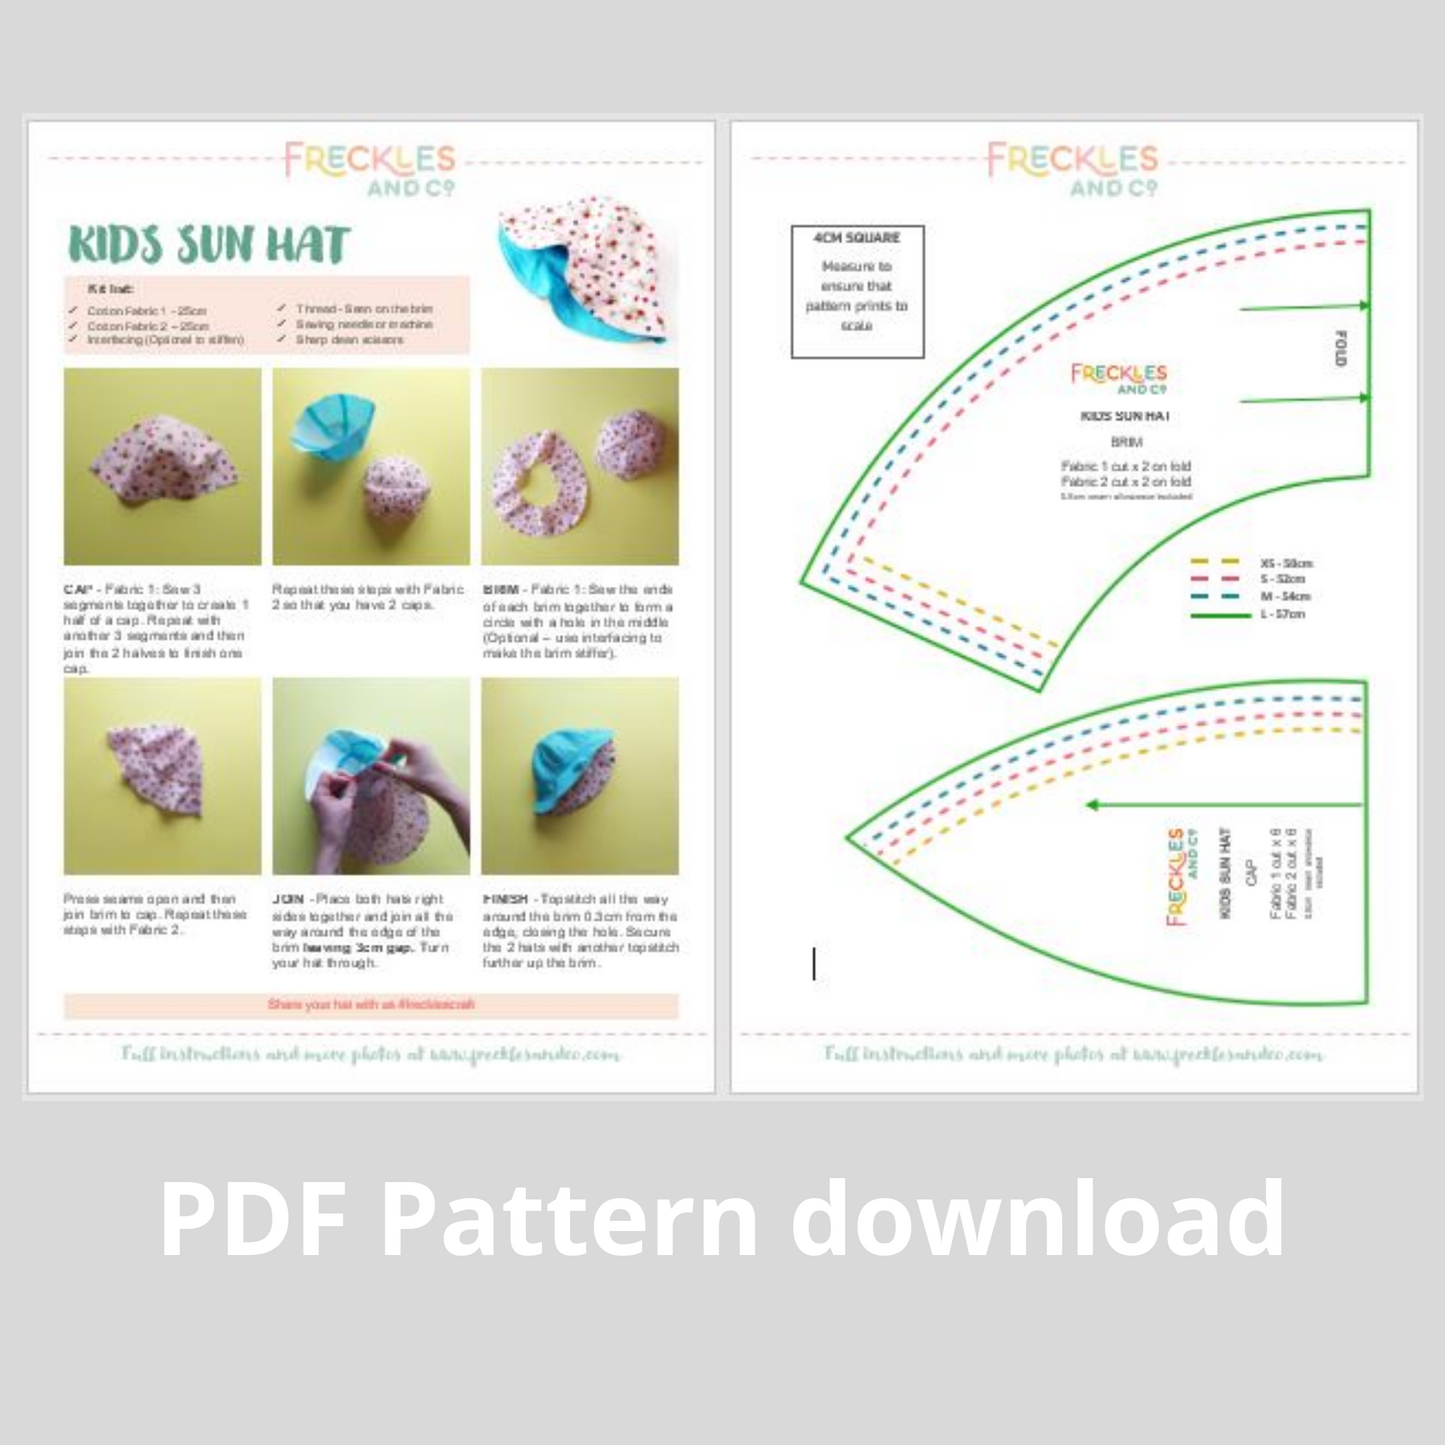 Kids sun hat - Pattern and Instructions